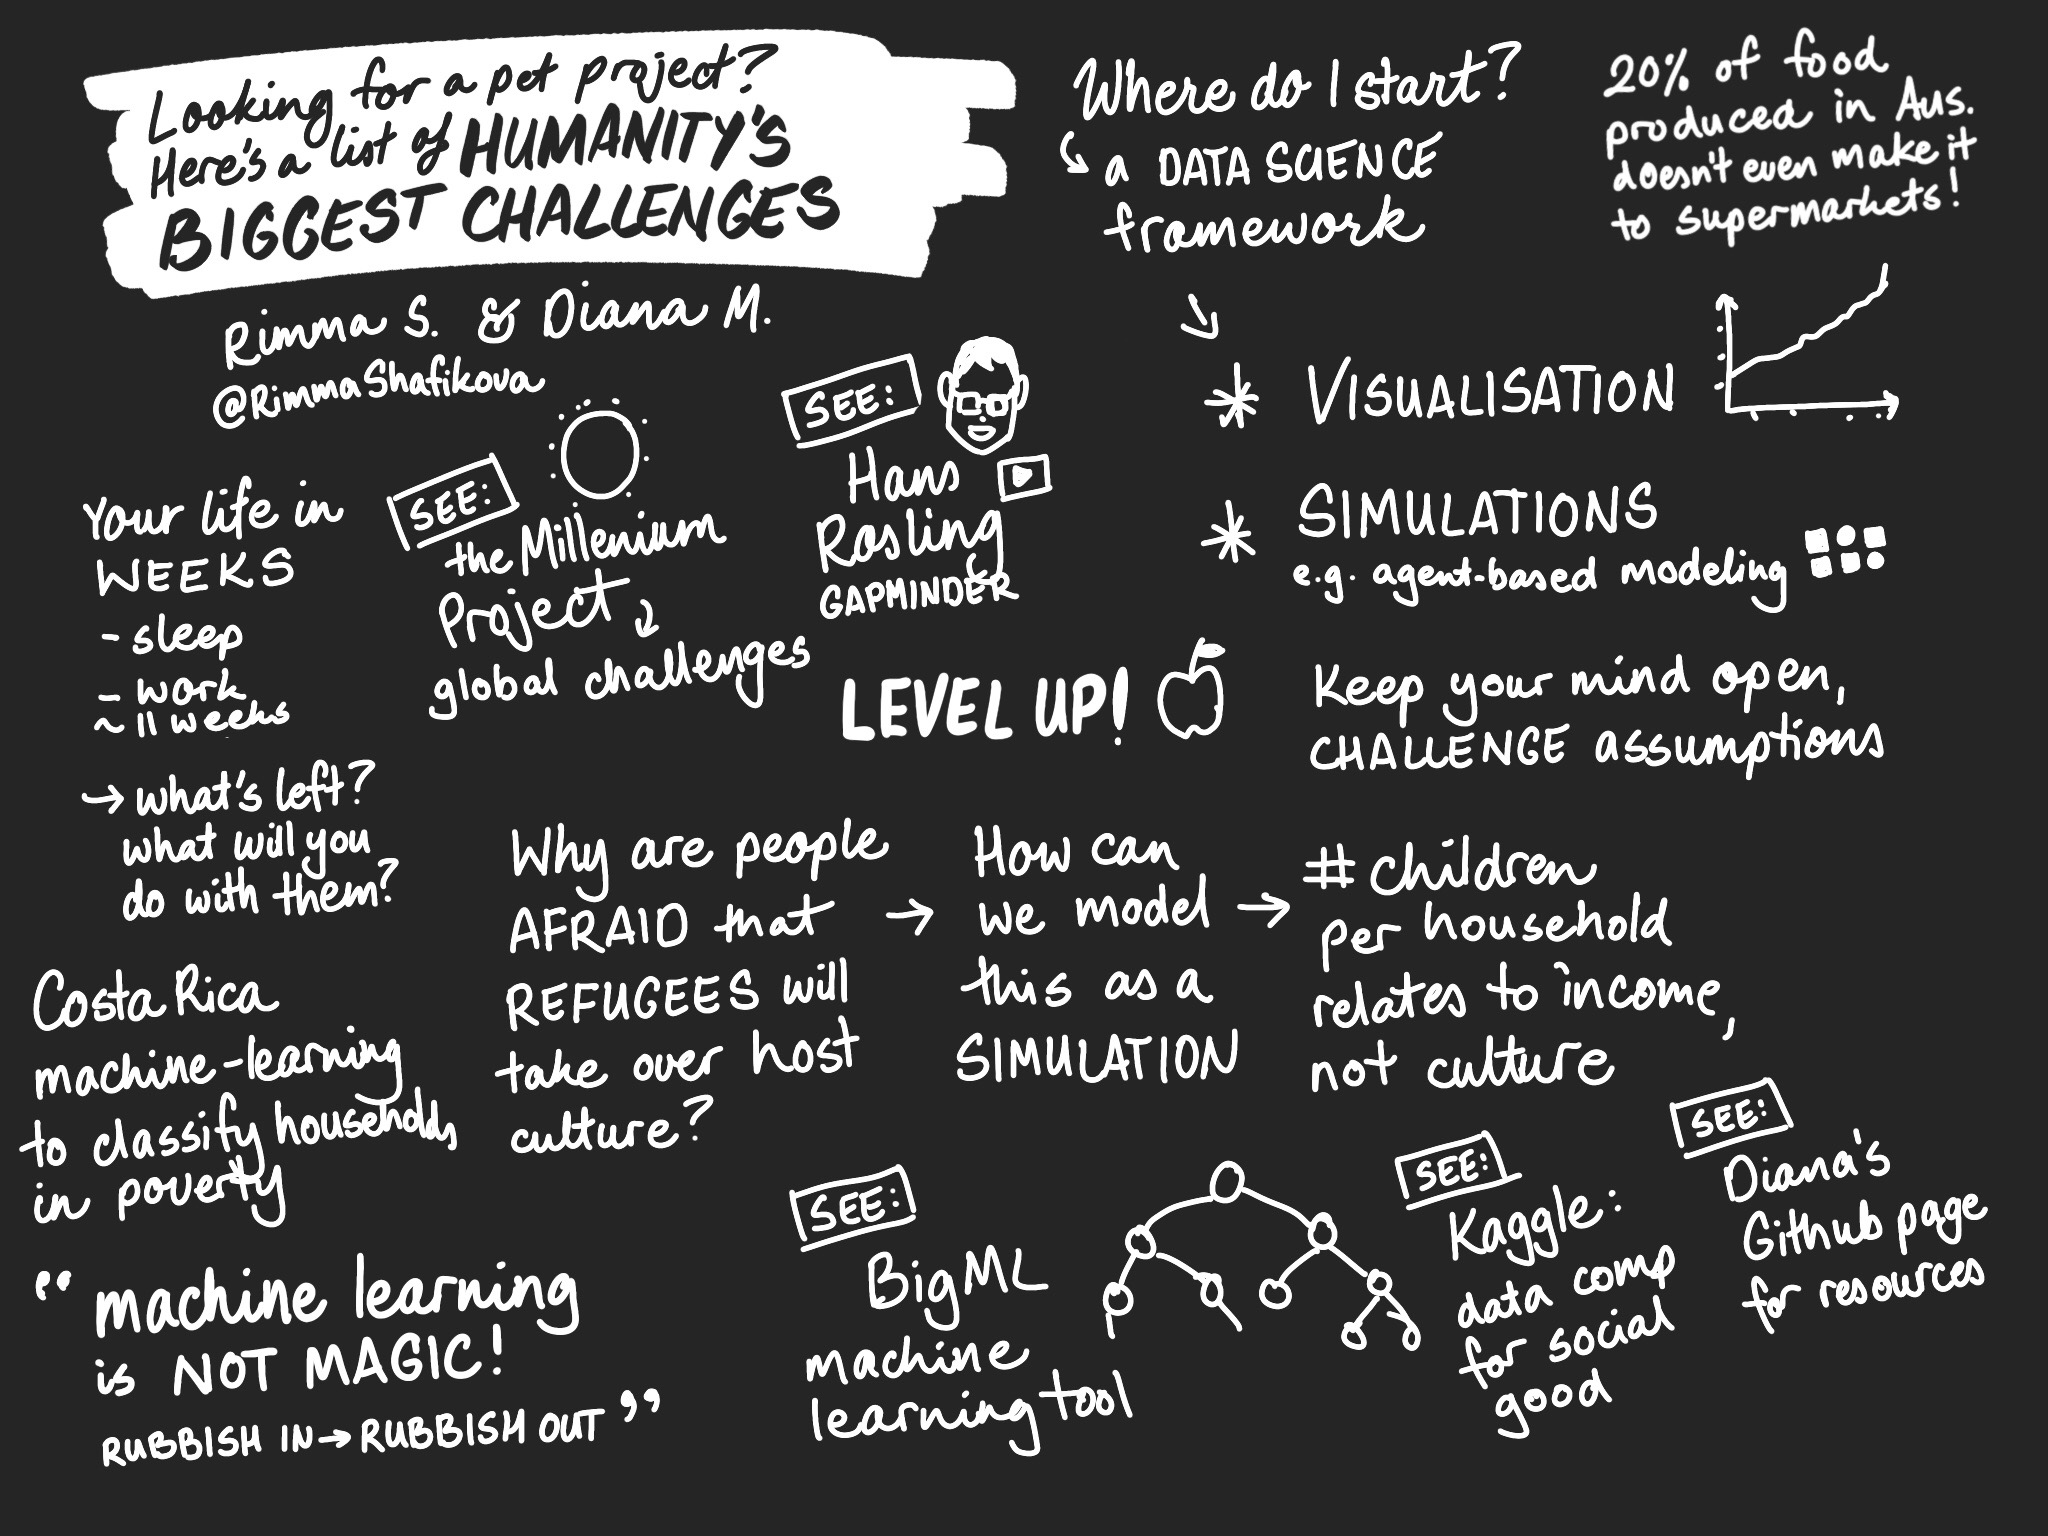 assets/sketching/img_1164.jpg|Sketchnotes of the talk Looking for a pet project? Here's a list of humanity's biggest challenges by Rimma and Diana